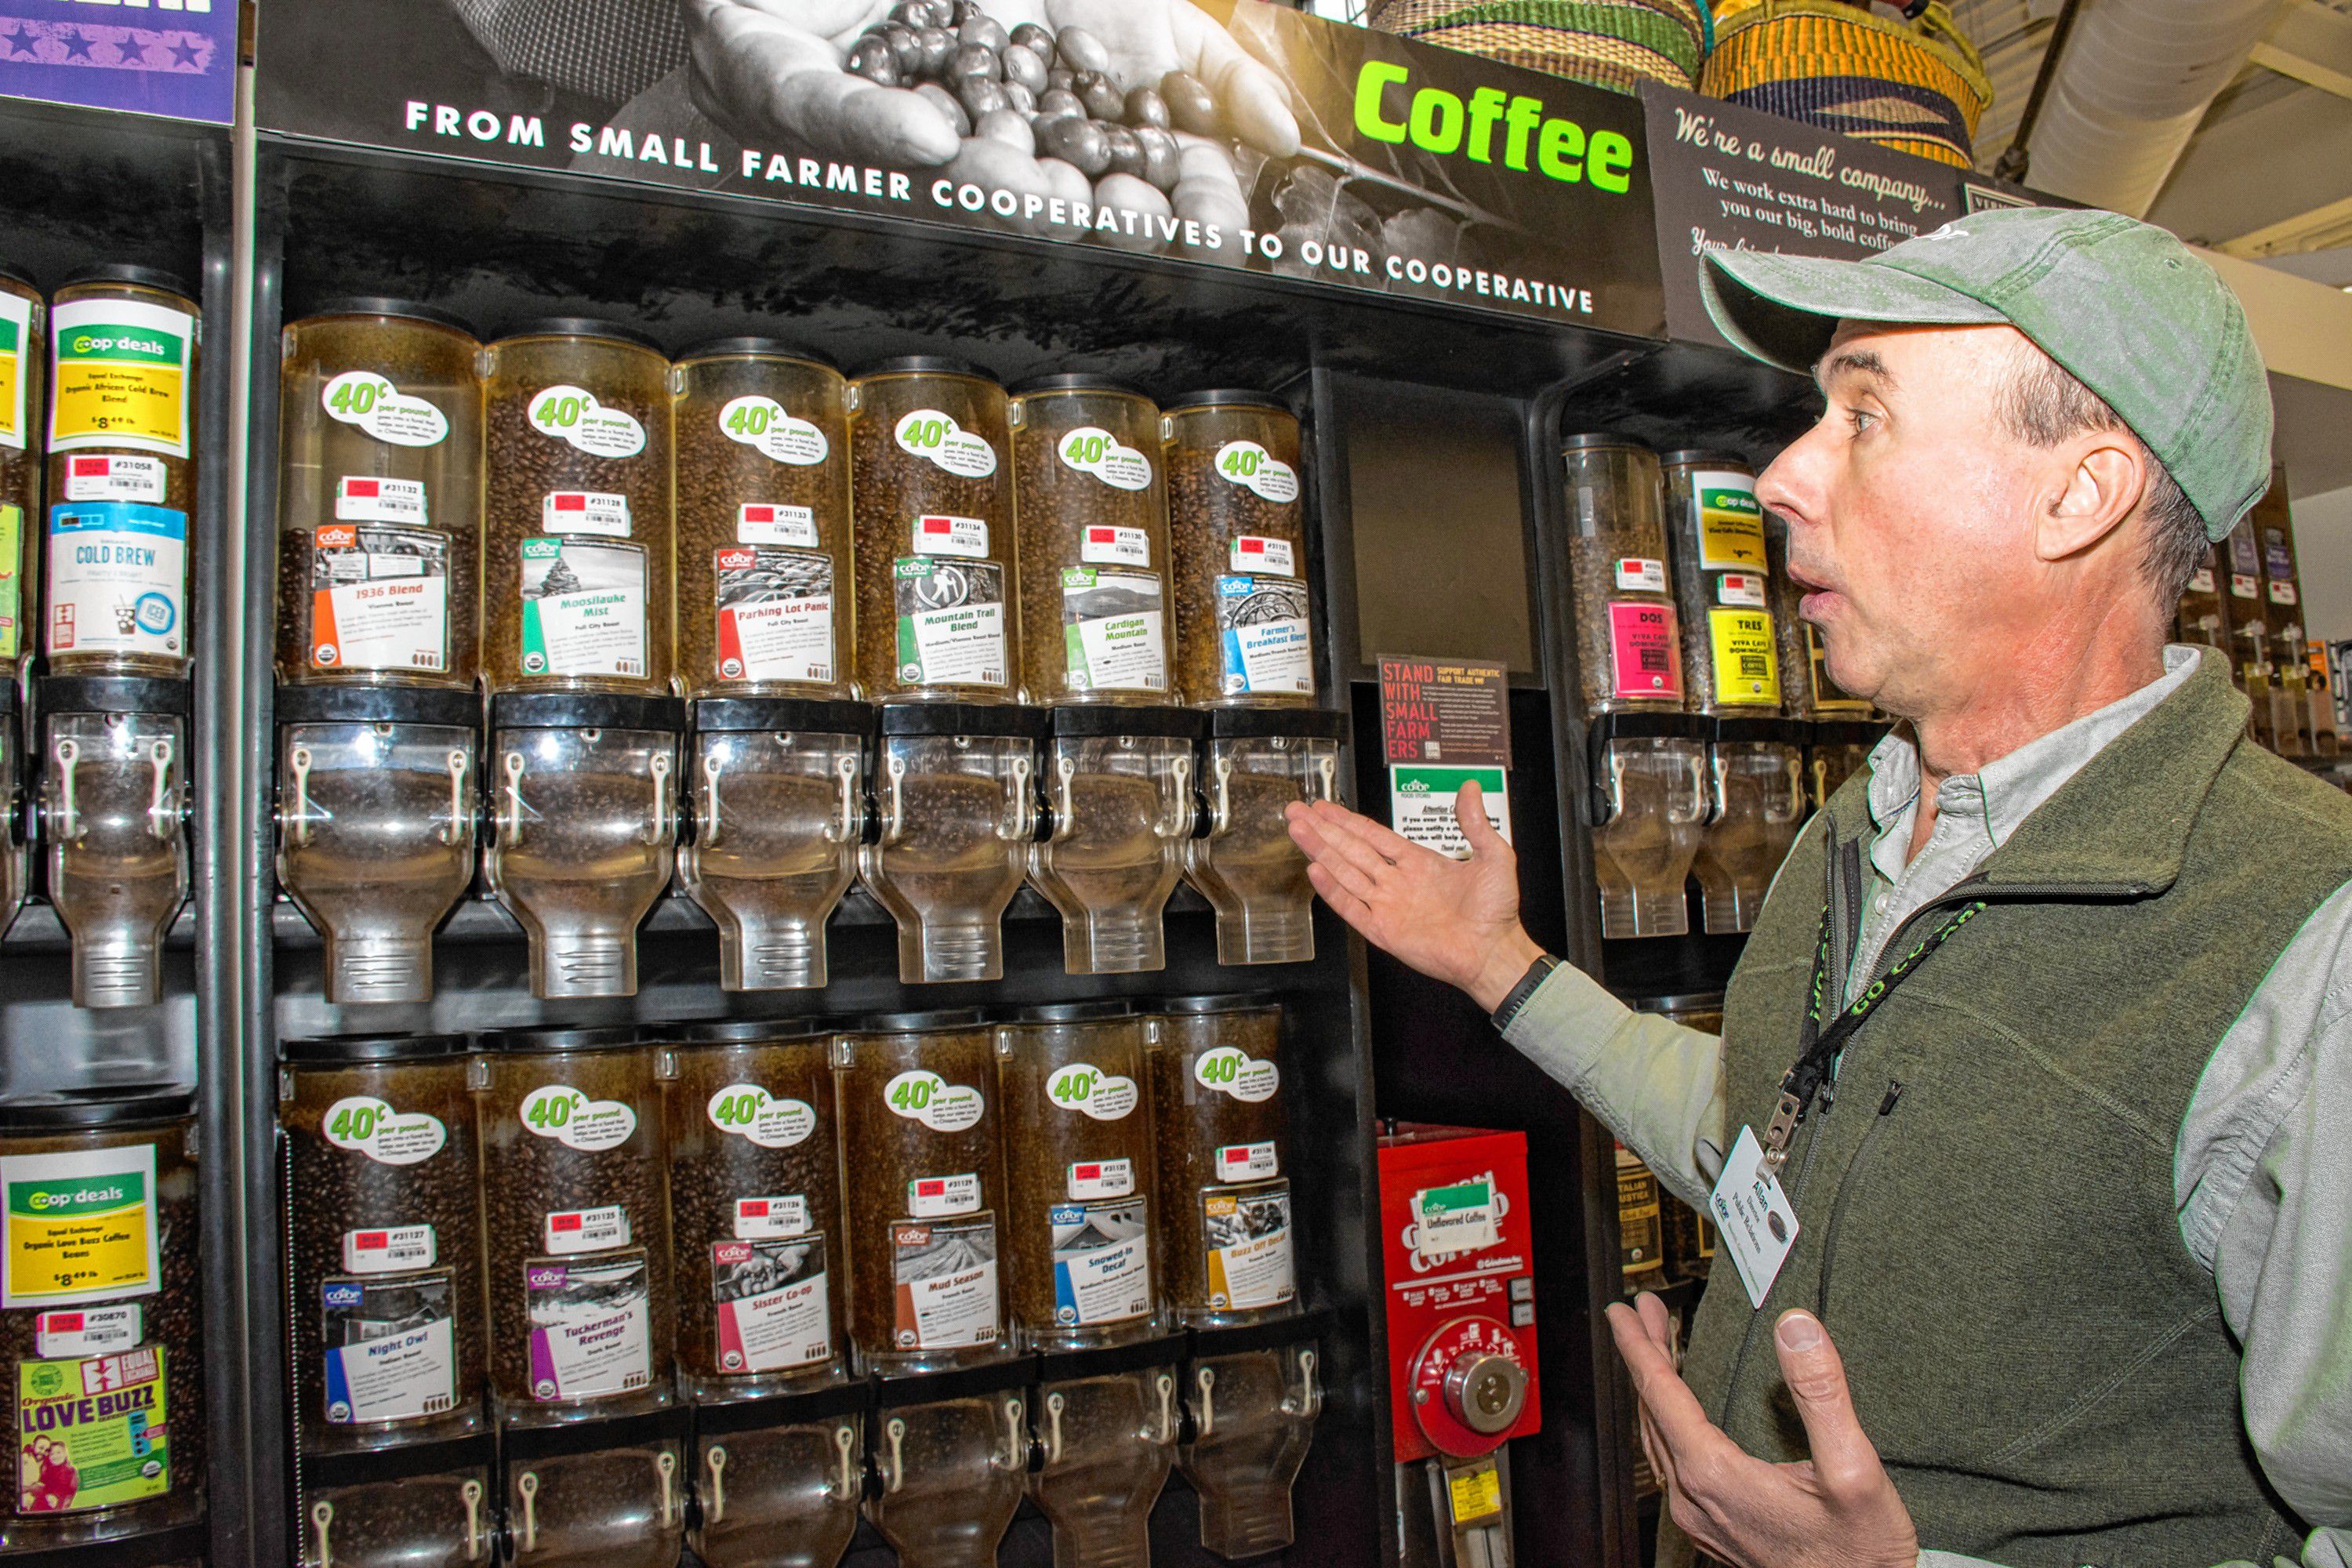 Alan Reetz, the Co-Op's director of public relations, praises the equal exchange program. "The consumer get's great coffee, at a price lower than our other organic beans and money is returned to the coffee growers. It's a win, win situation." Nancy Nutile-McMenemy photograph.